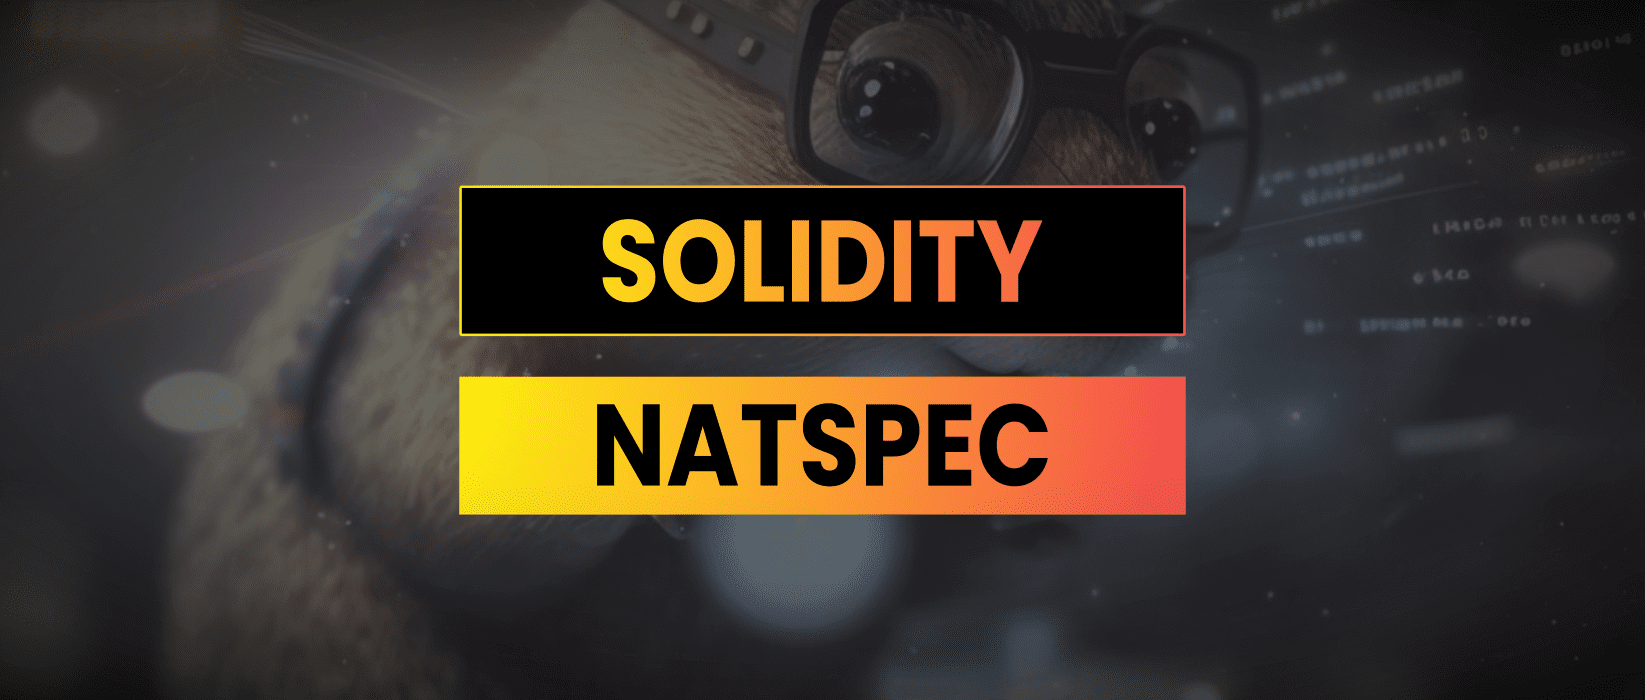 Natspec in Solidity | Solidity Tips & Examples